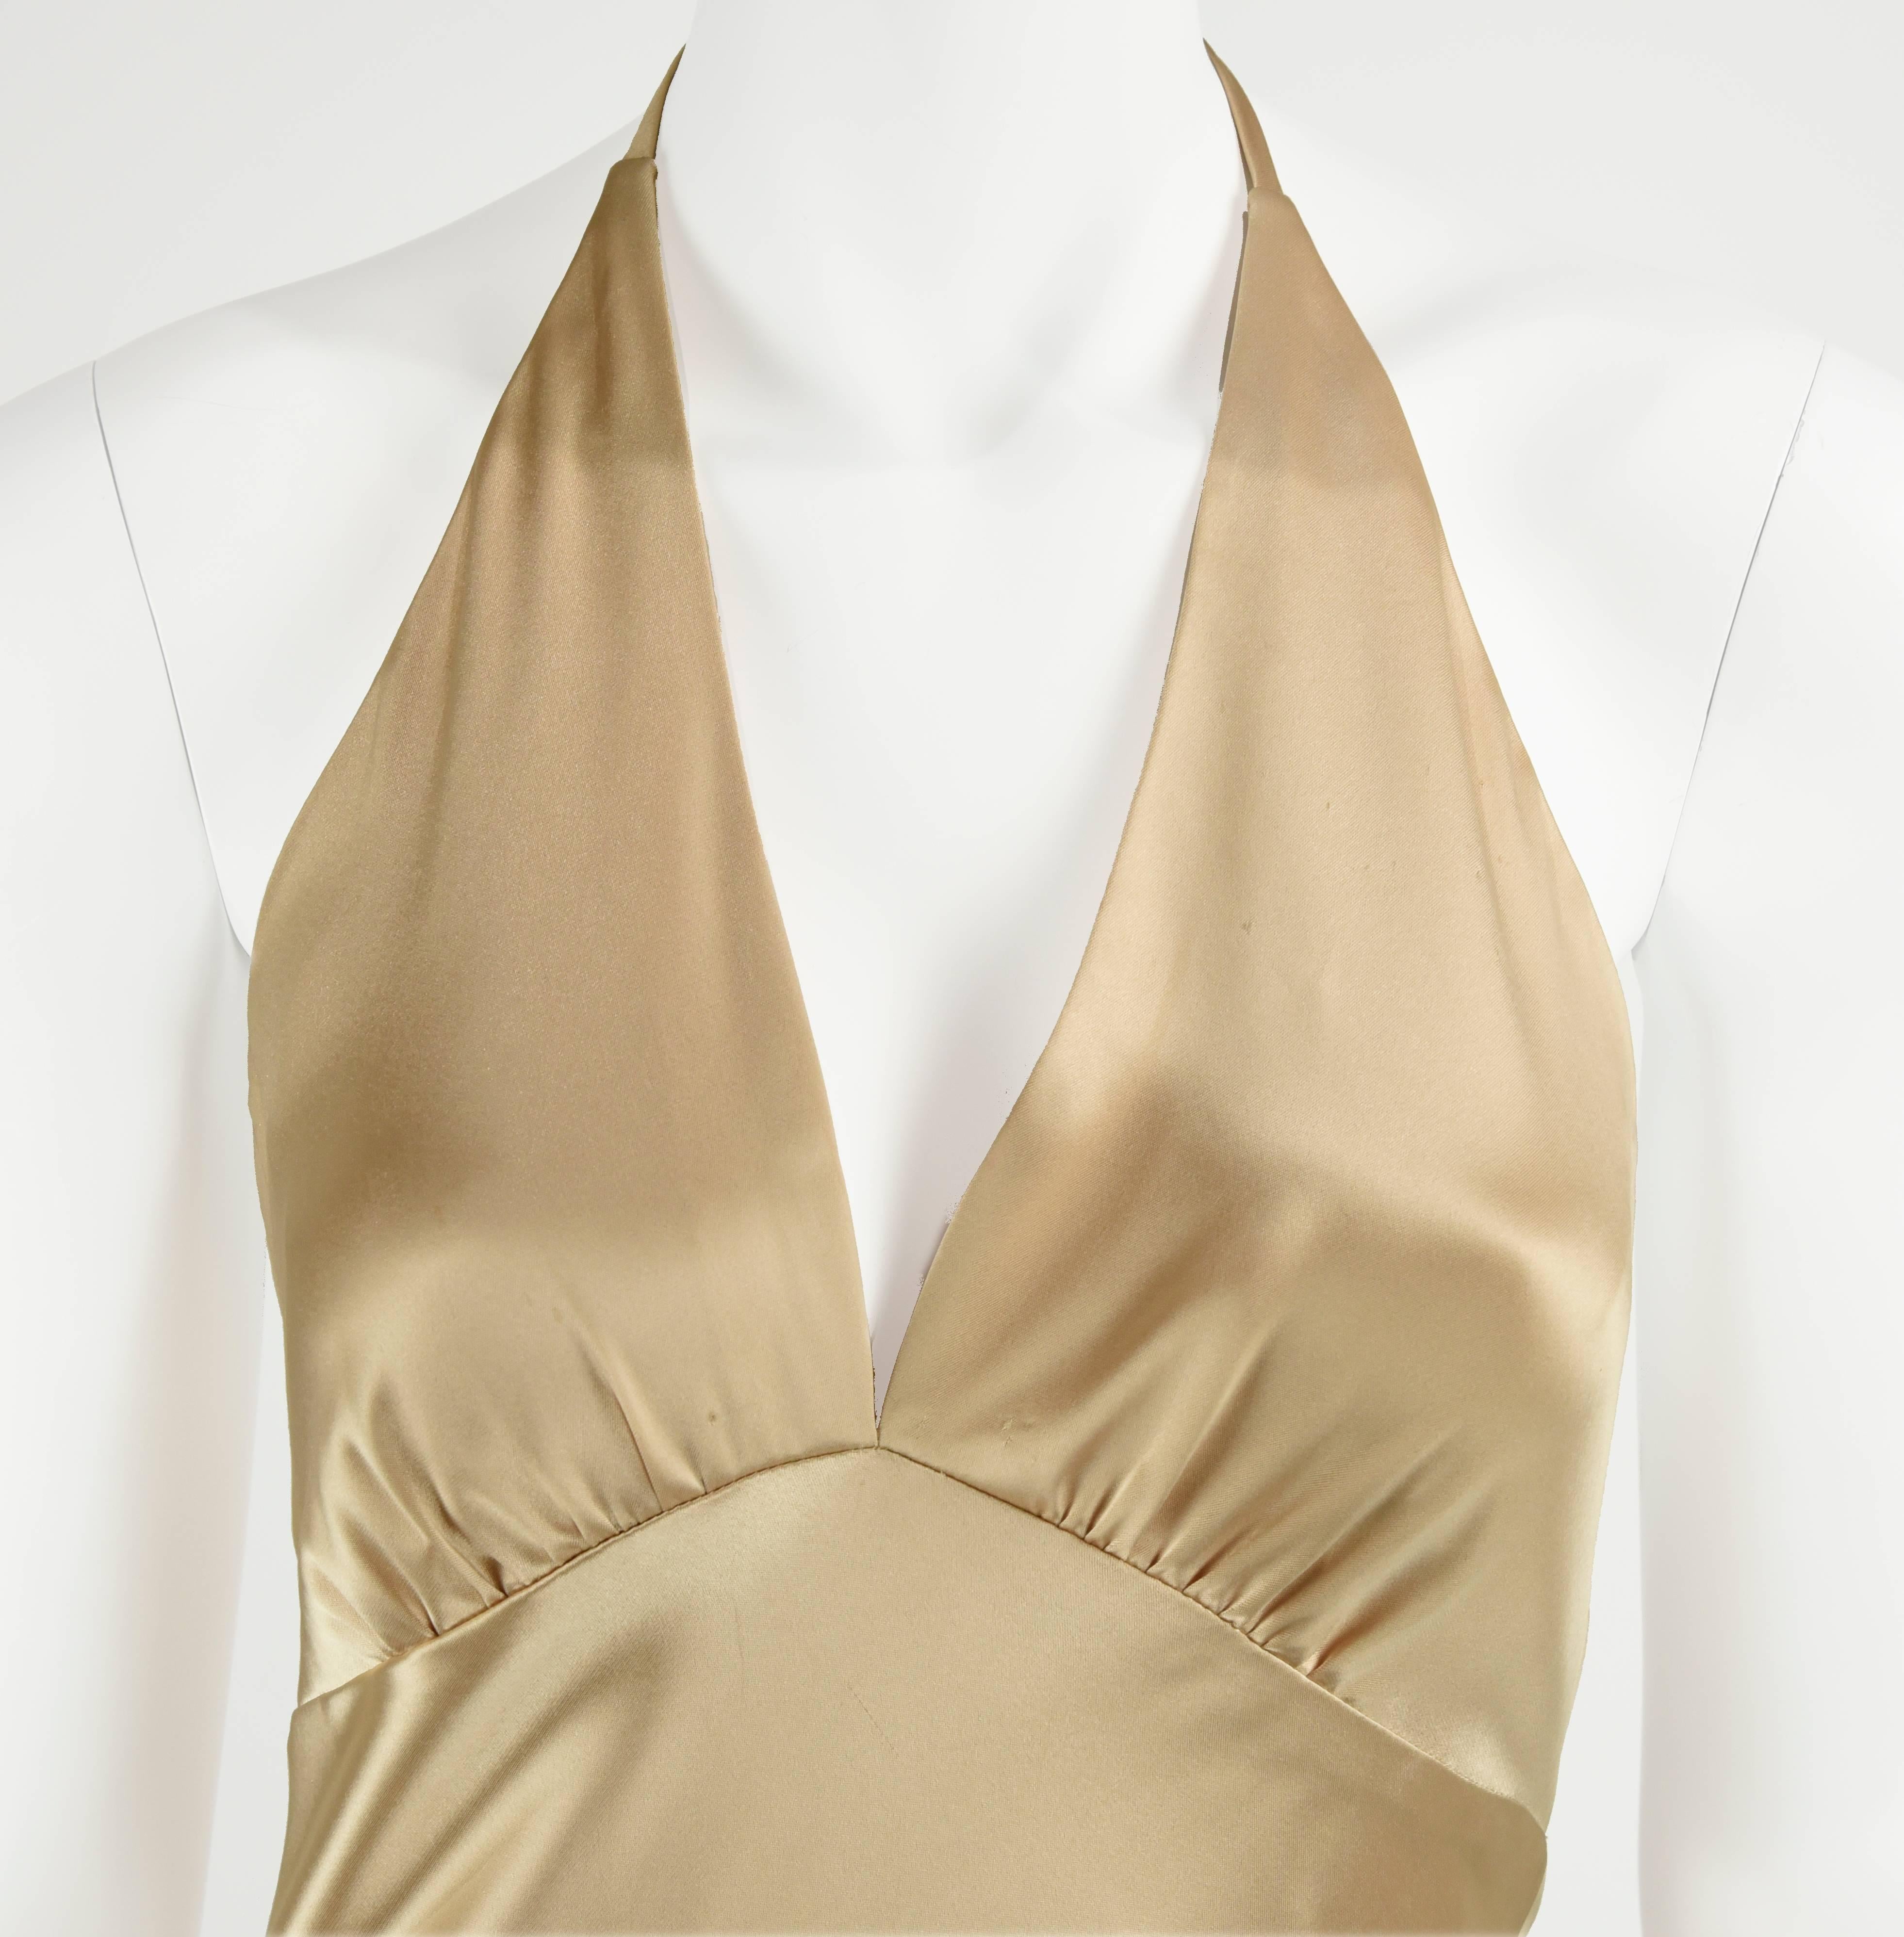 Women's 1990s Carmen Marc Valvo Champagne Satin Jean Harlow Gown Size 6 For Sale